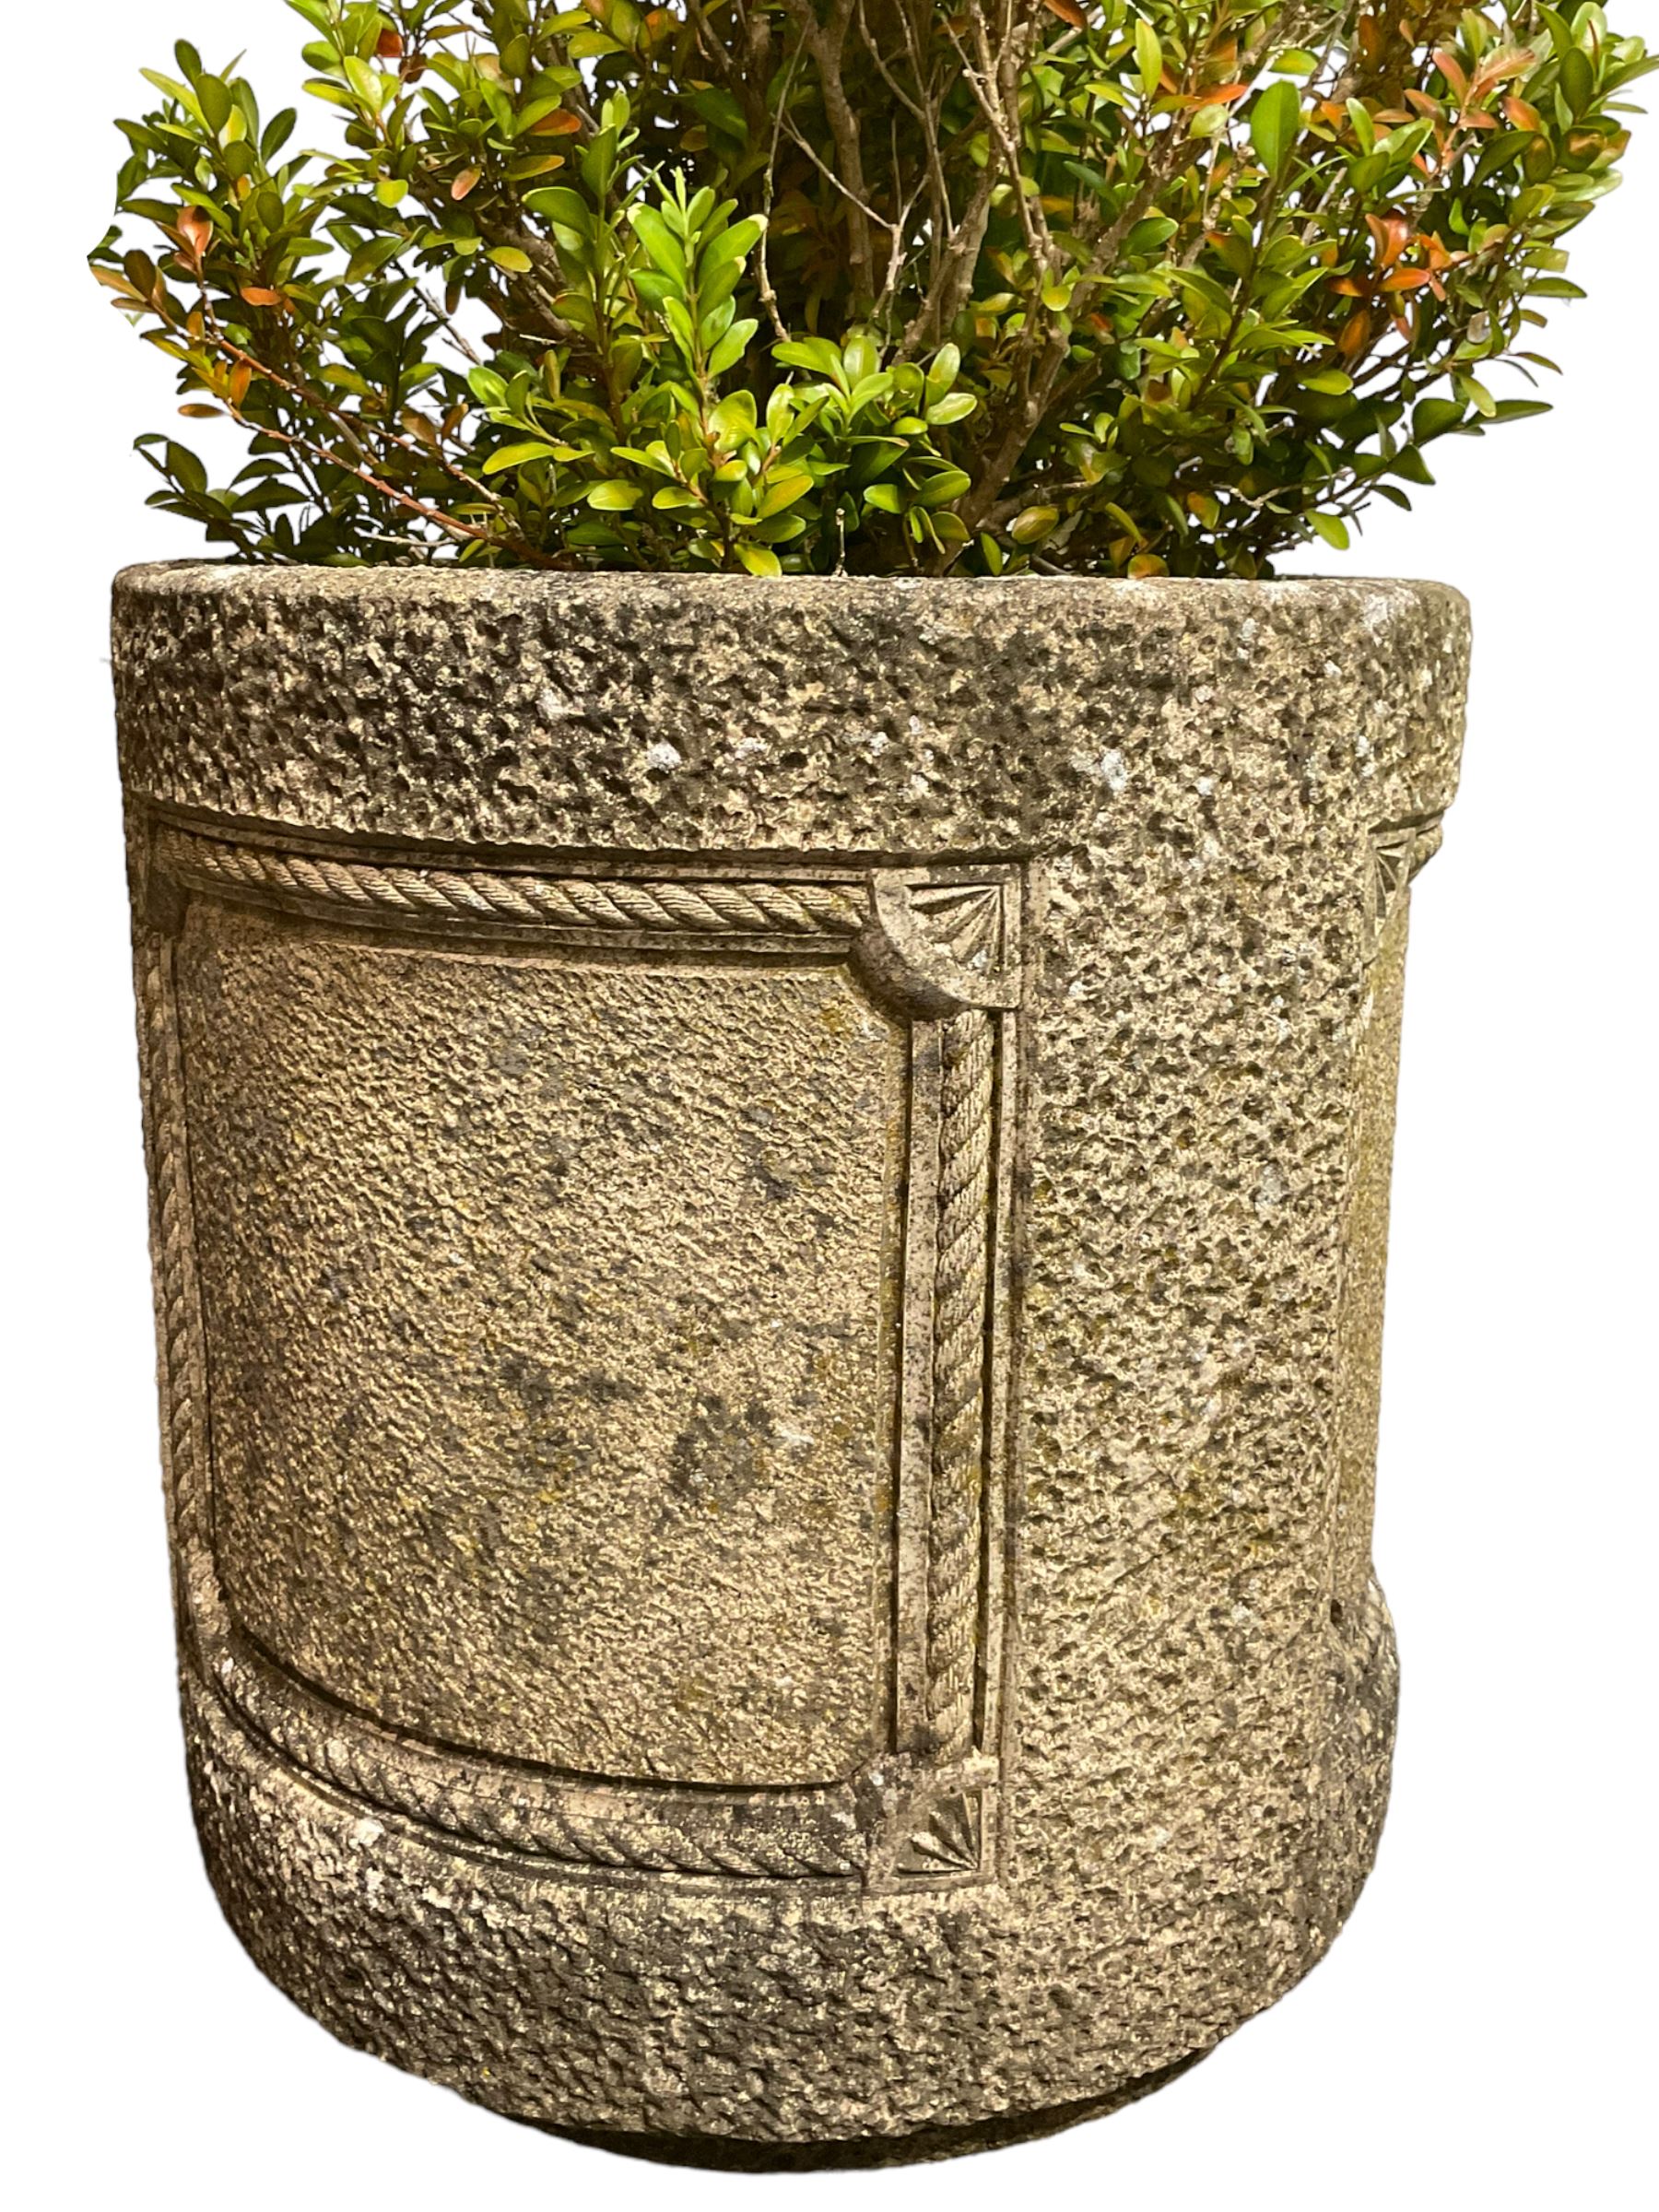 Pair of cast stone cylindrical planters - Image 3 of 5